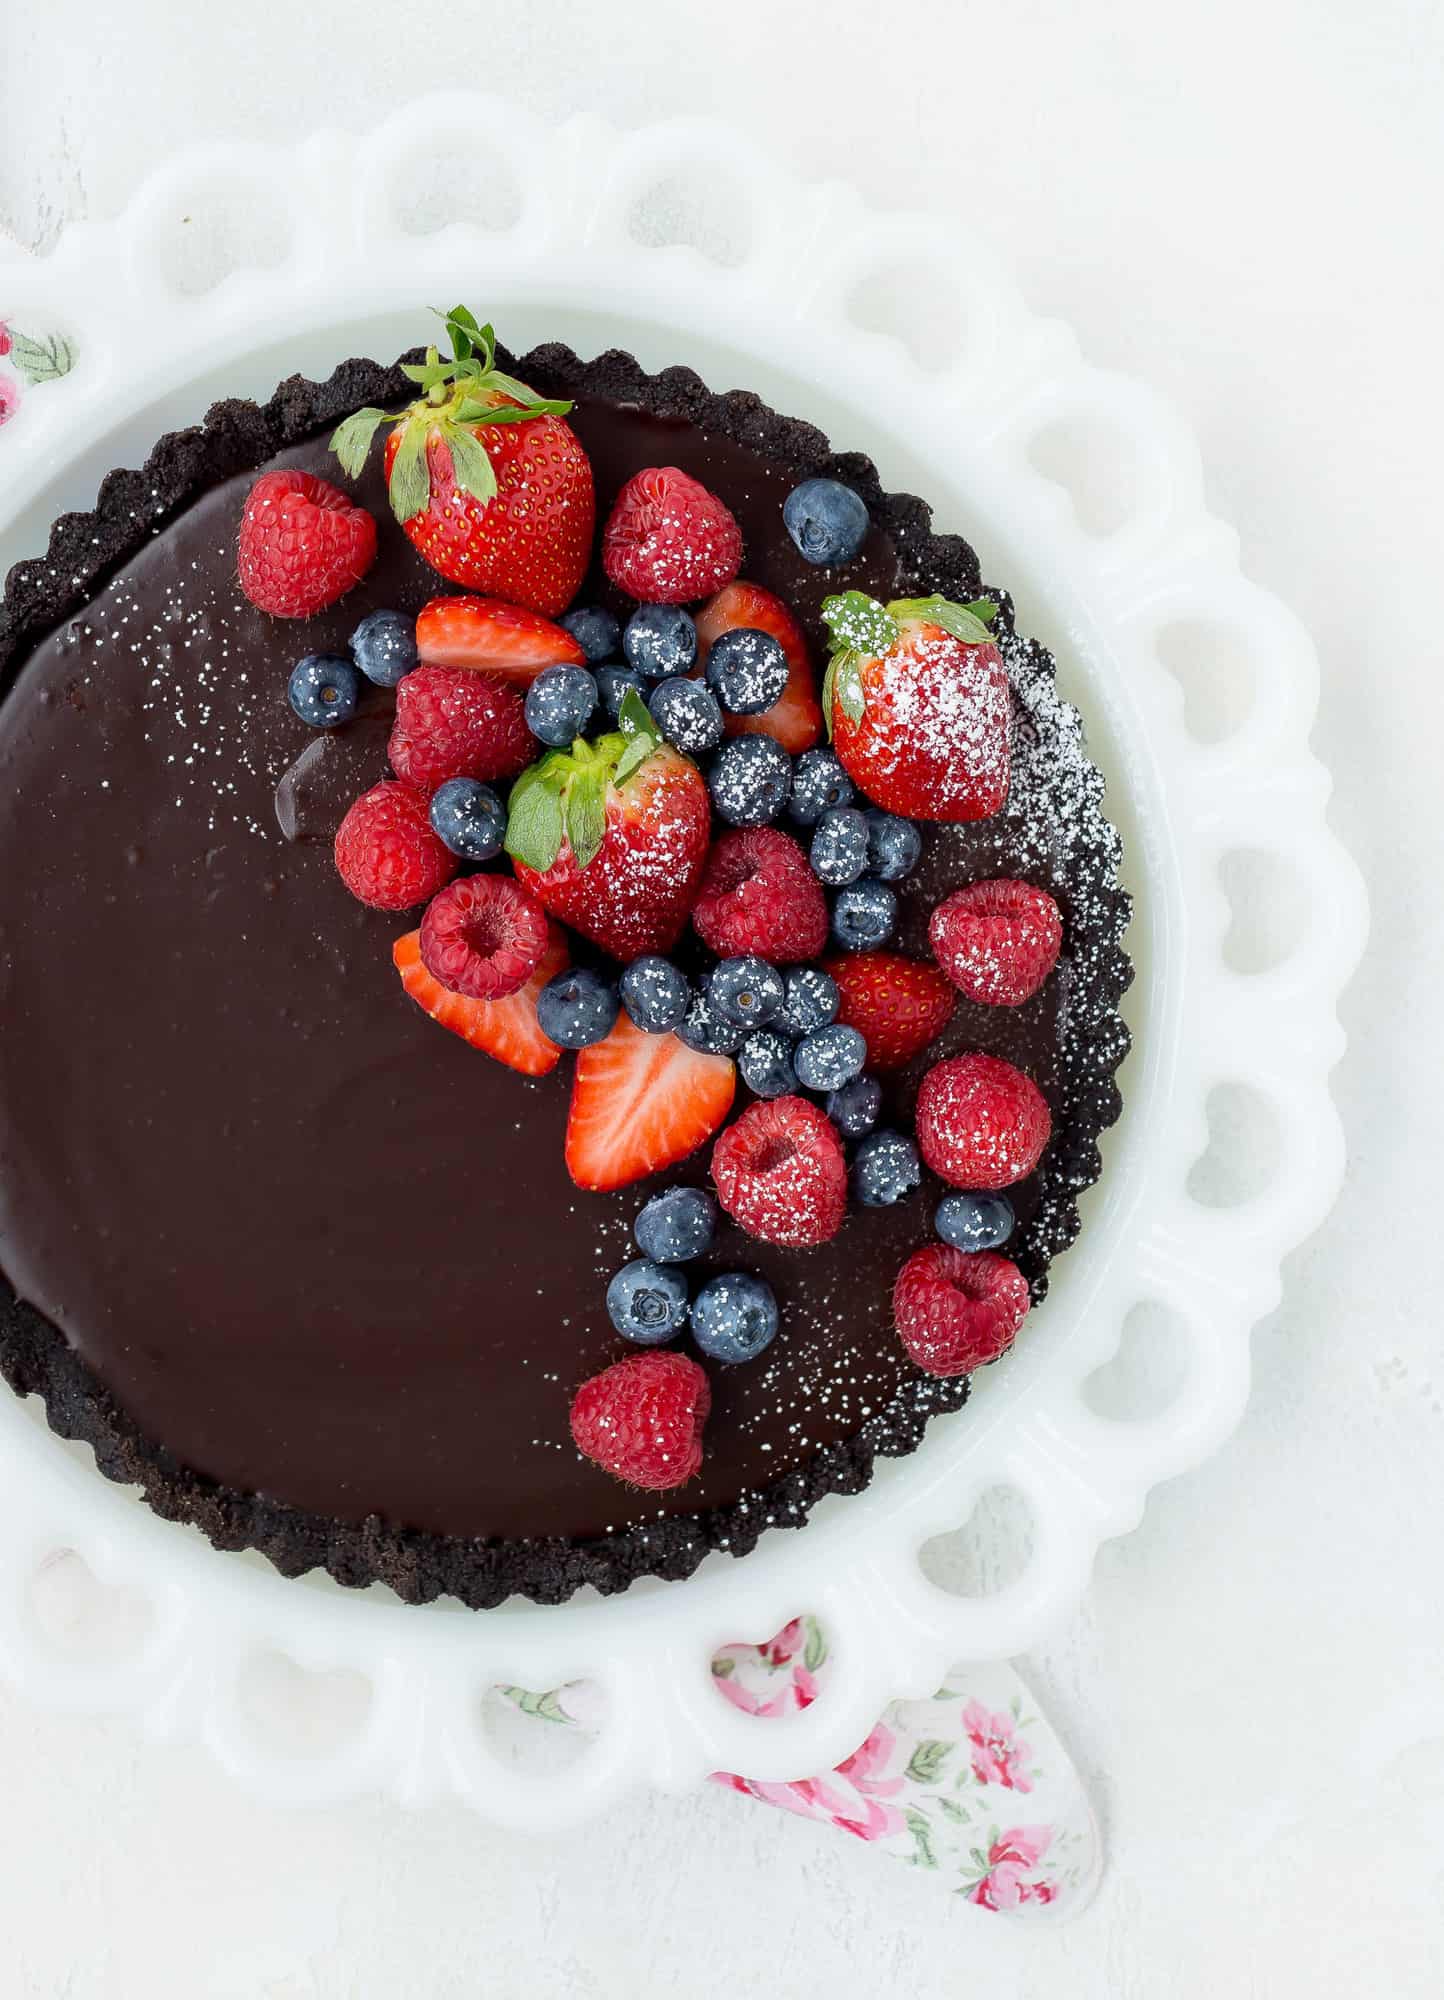 Overhead view of a no bake chocolate tart on a white plate.